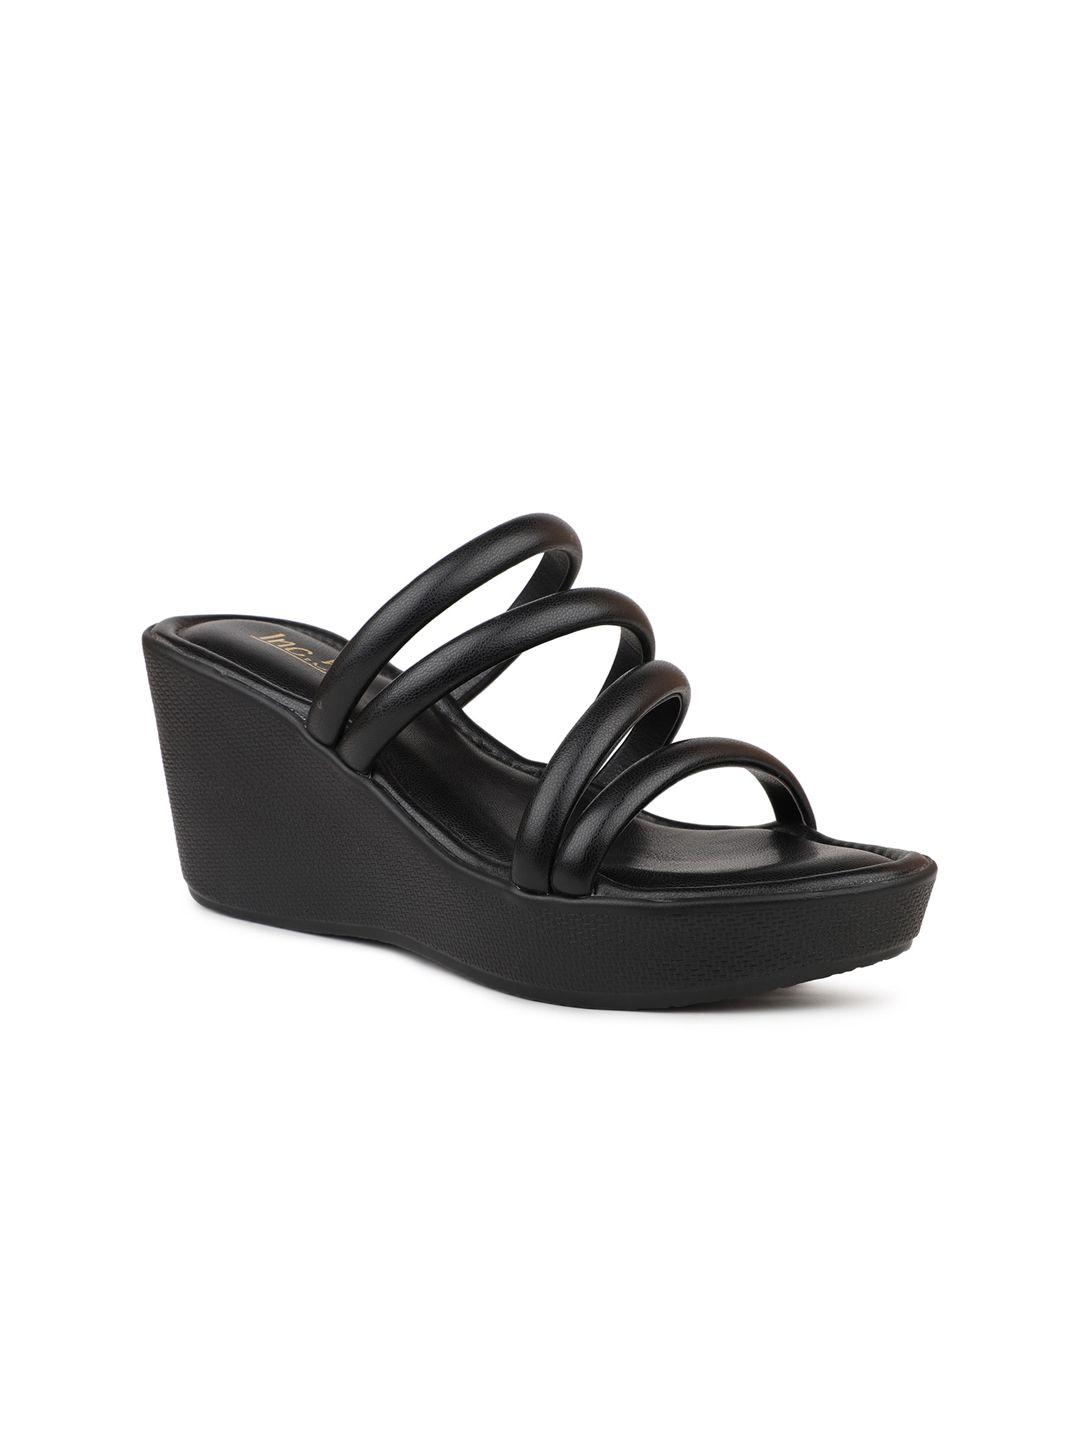 inc 5 solid open toe wedges